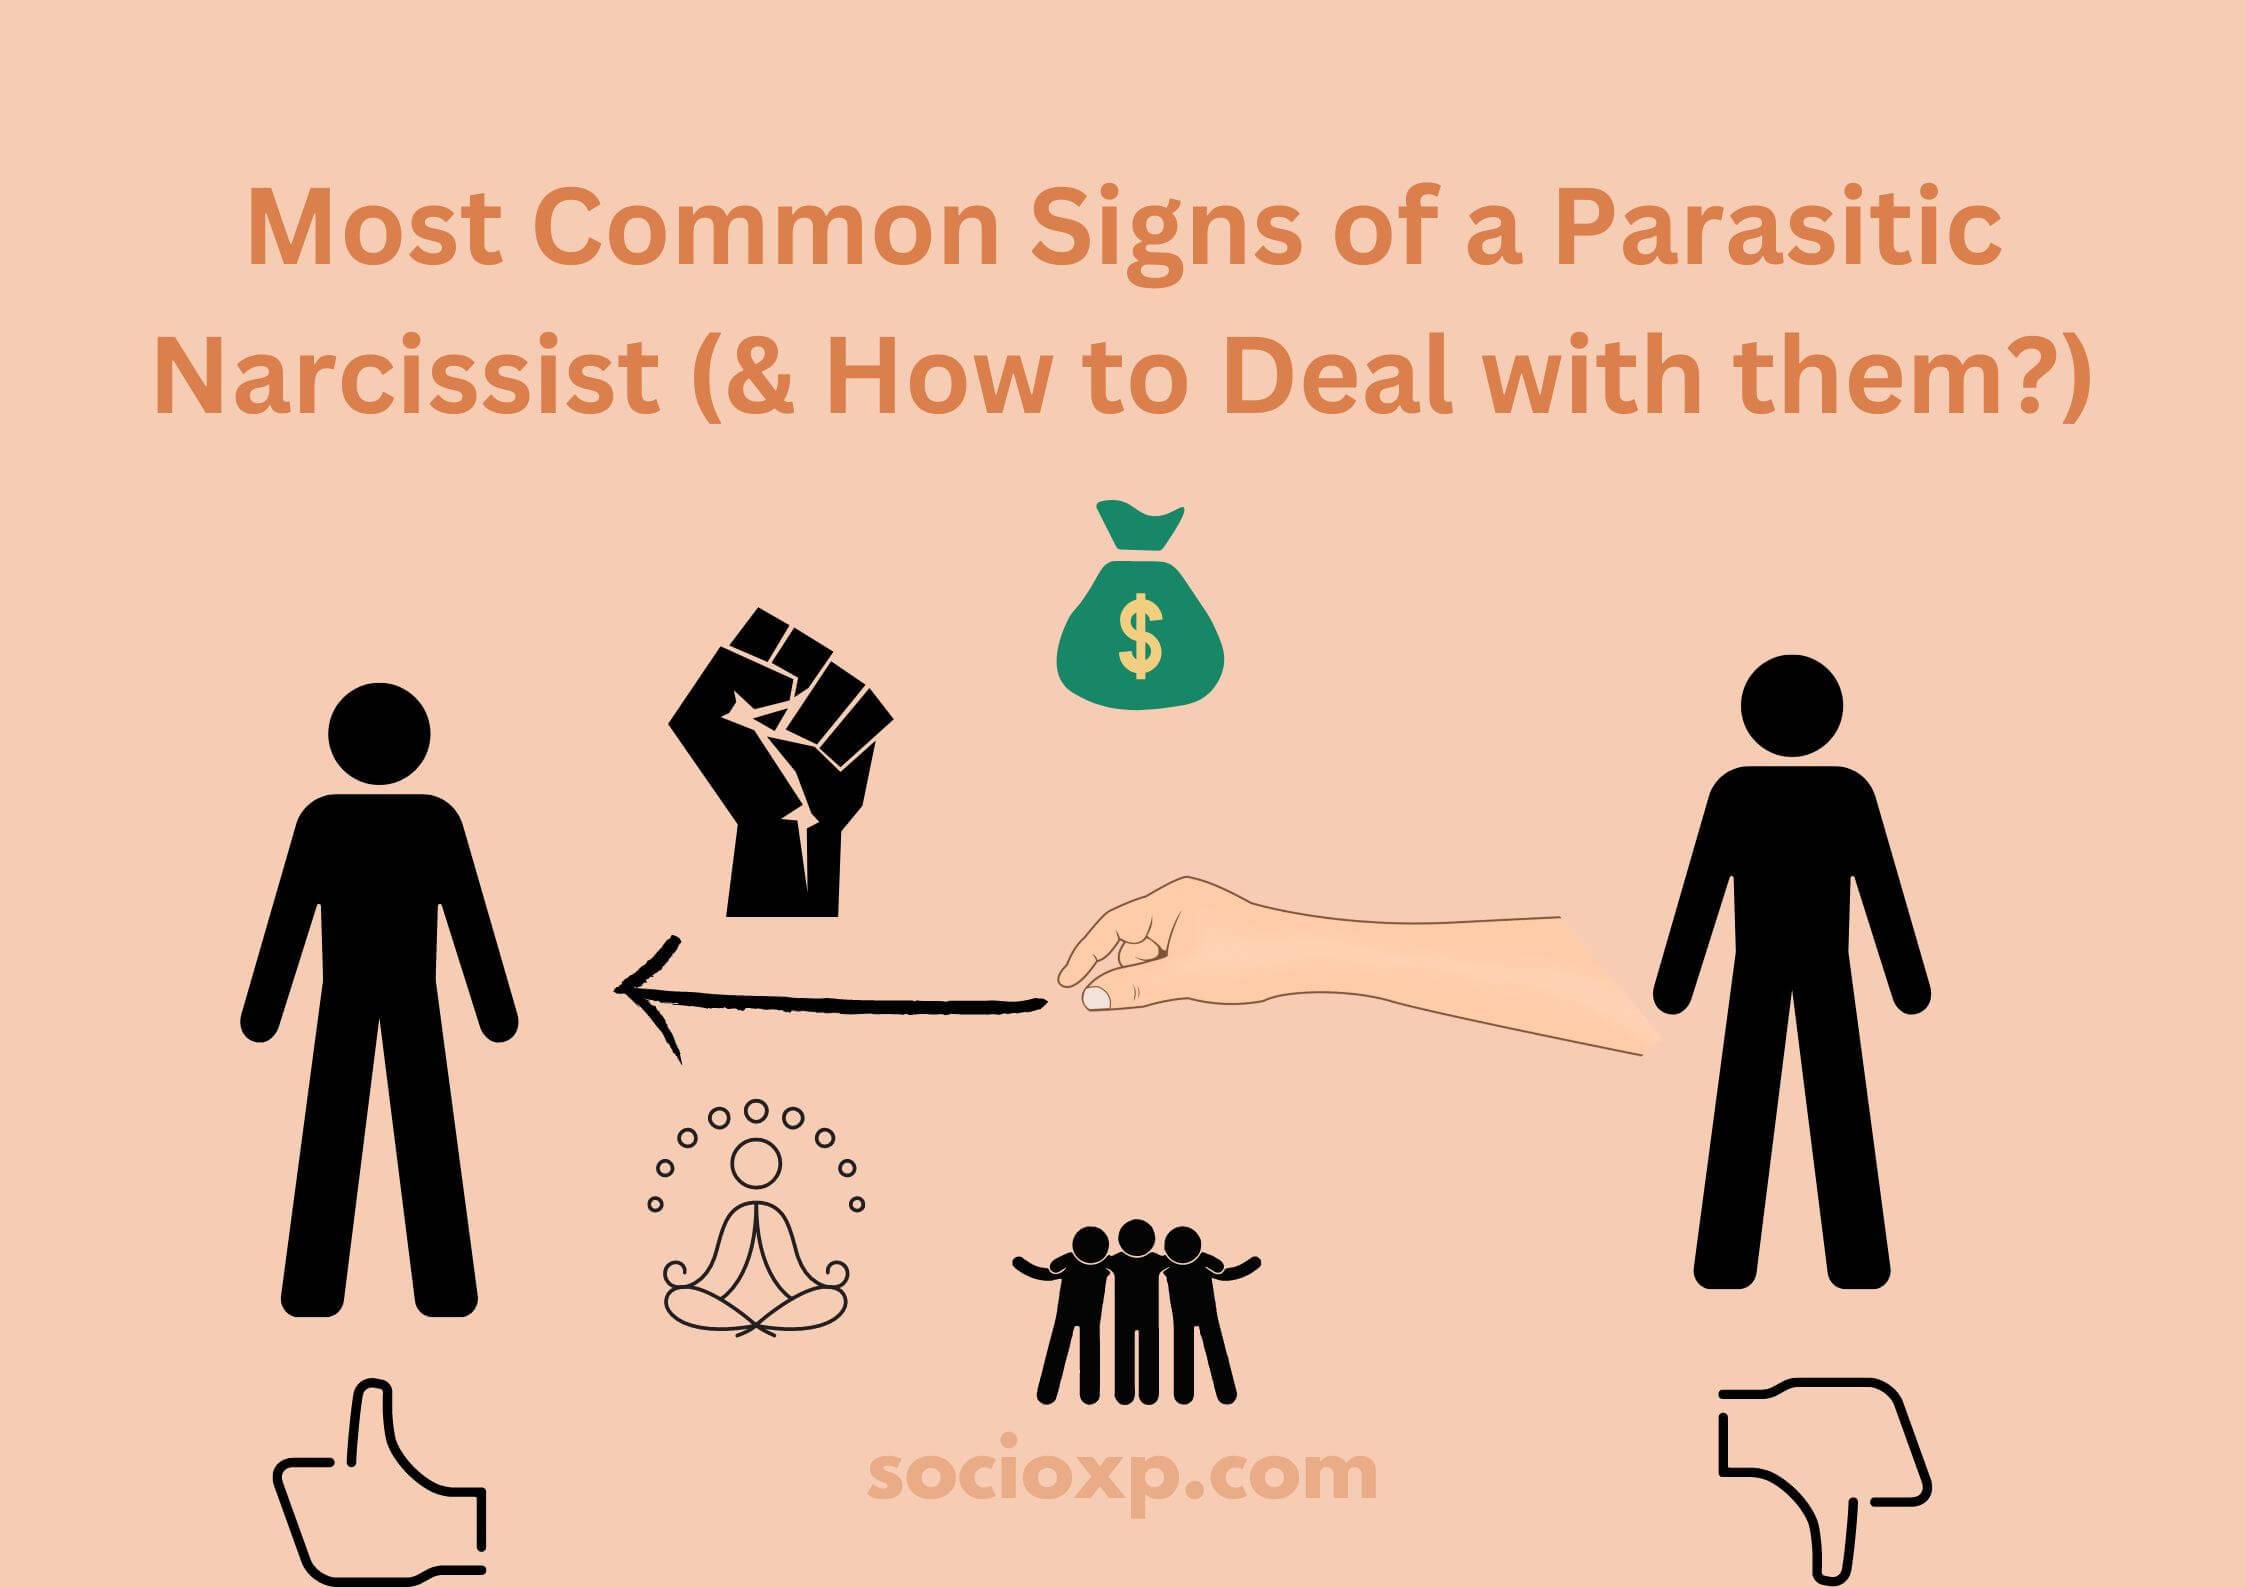 Most Common Signs of a Parasitic Narcissist (& How to Deal with them?)